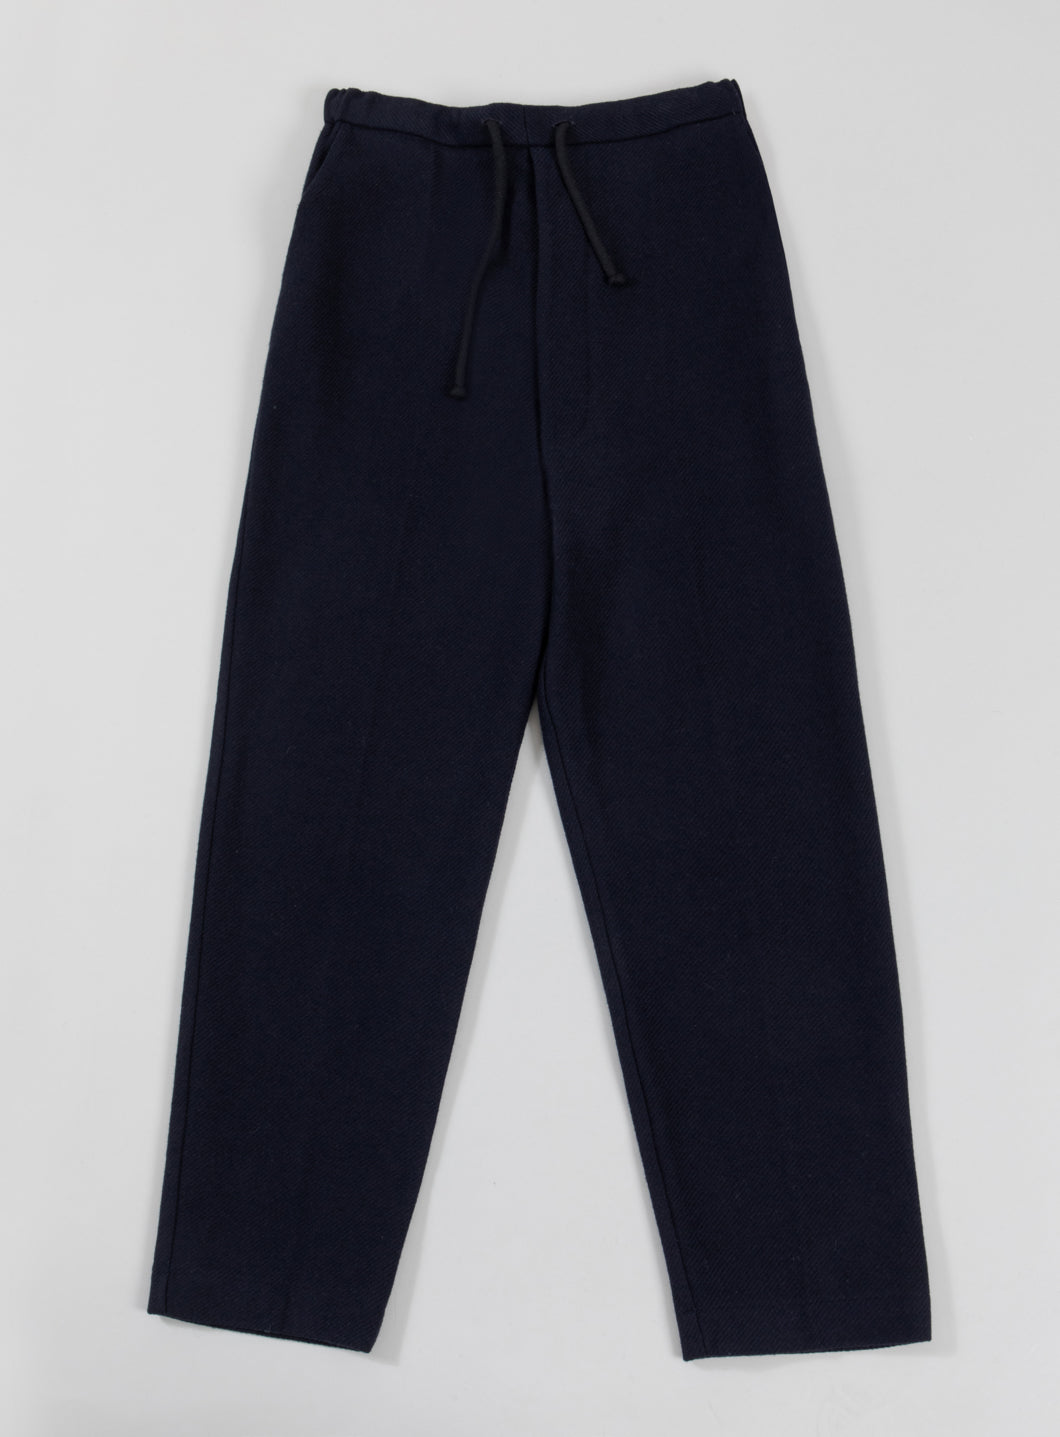 Pleated Pants with Tightening Link in Navy Blue Wool